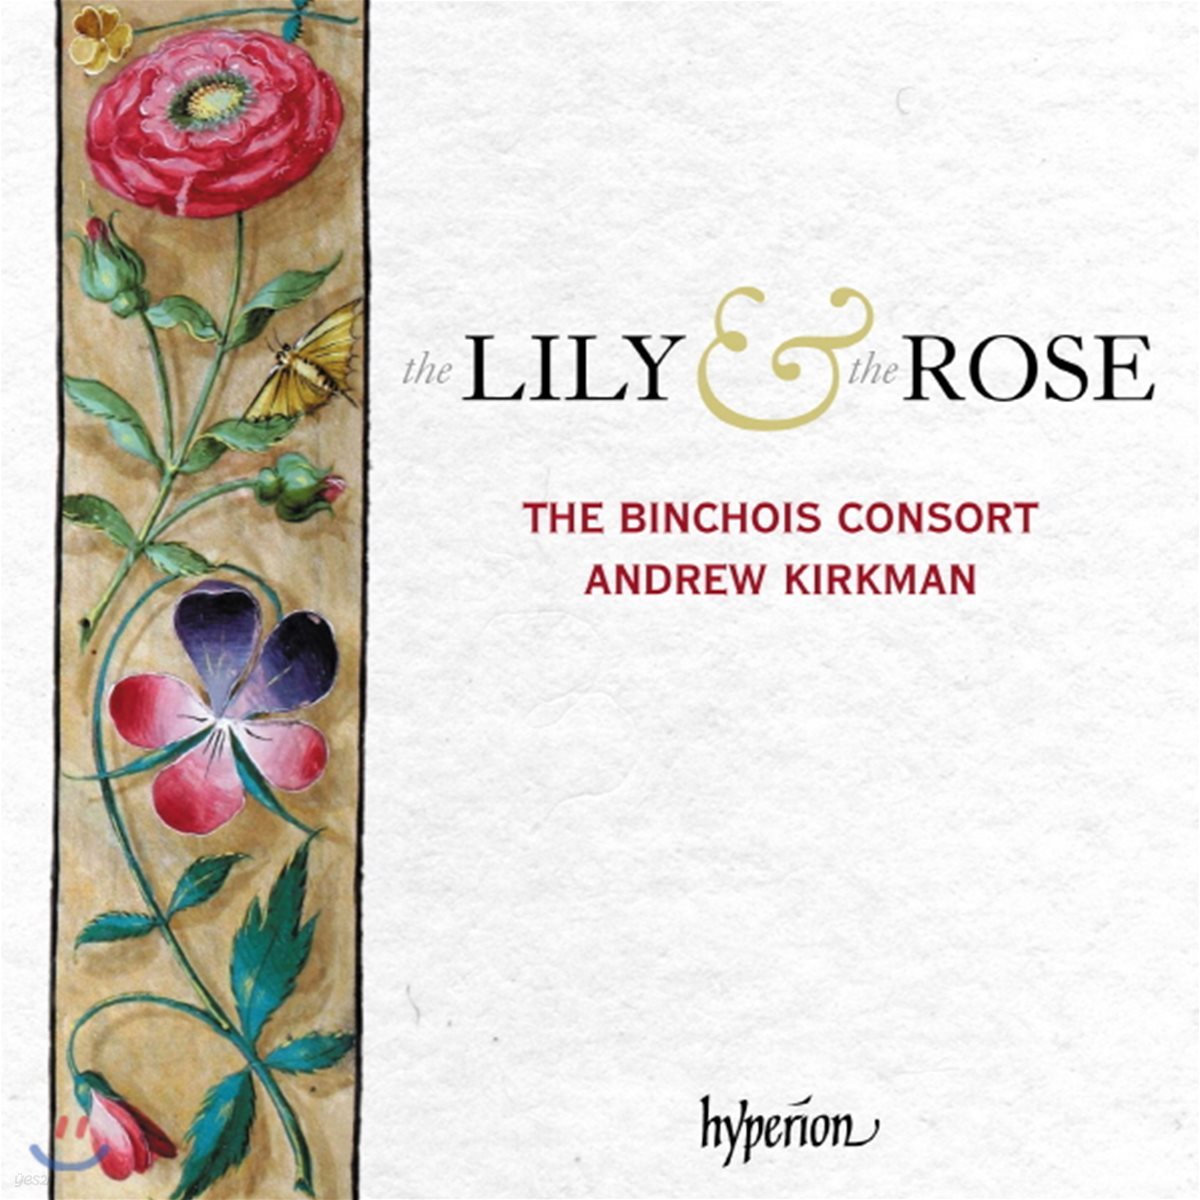 Andrew Kirkman 백합과 장미 - 성모 마리아를 위한 중세 후기 영국 음악 (The Lily and the Rose - Adoration of the Virgin in Sound & Stone)